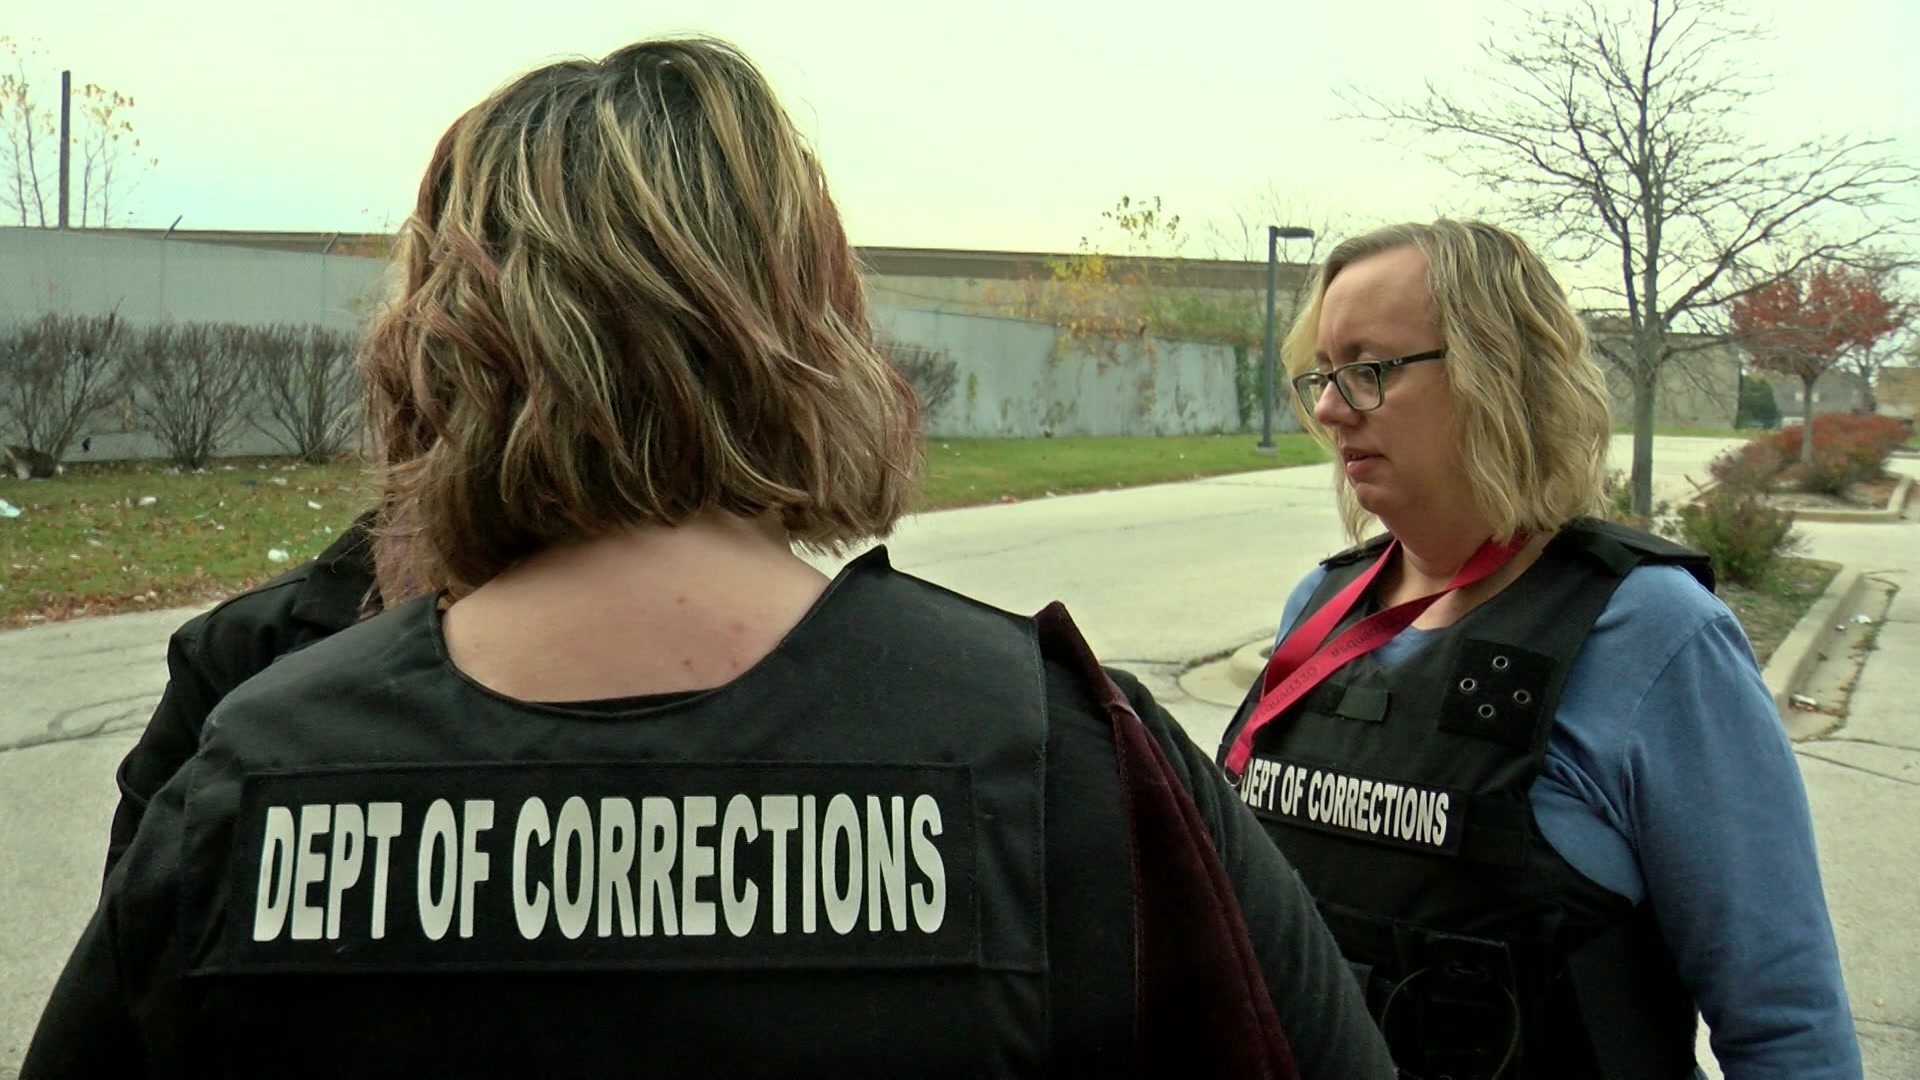 Milwaukee corrections officers visit homes of registered sex offenders during trick-or-treat